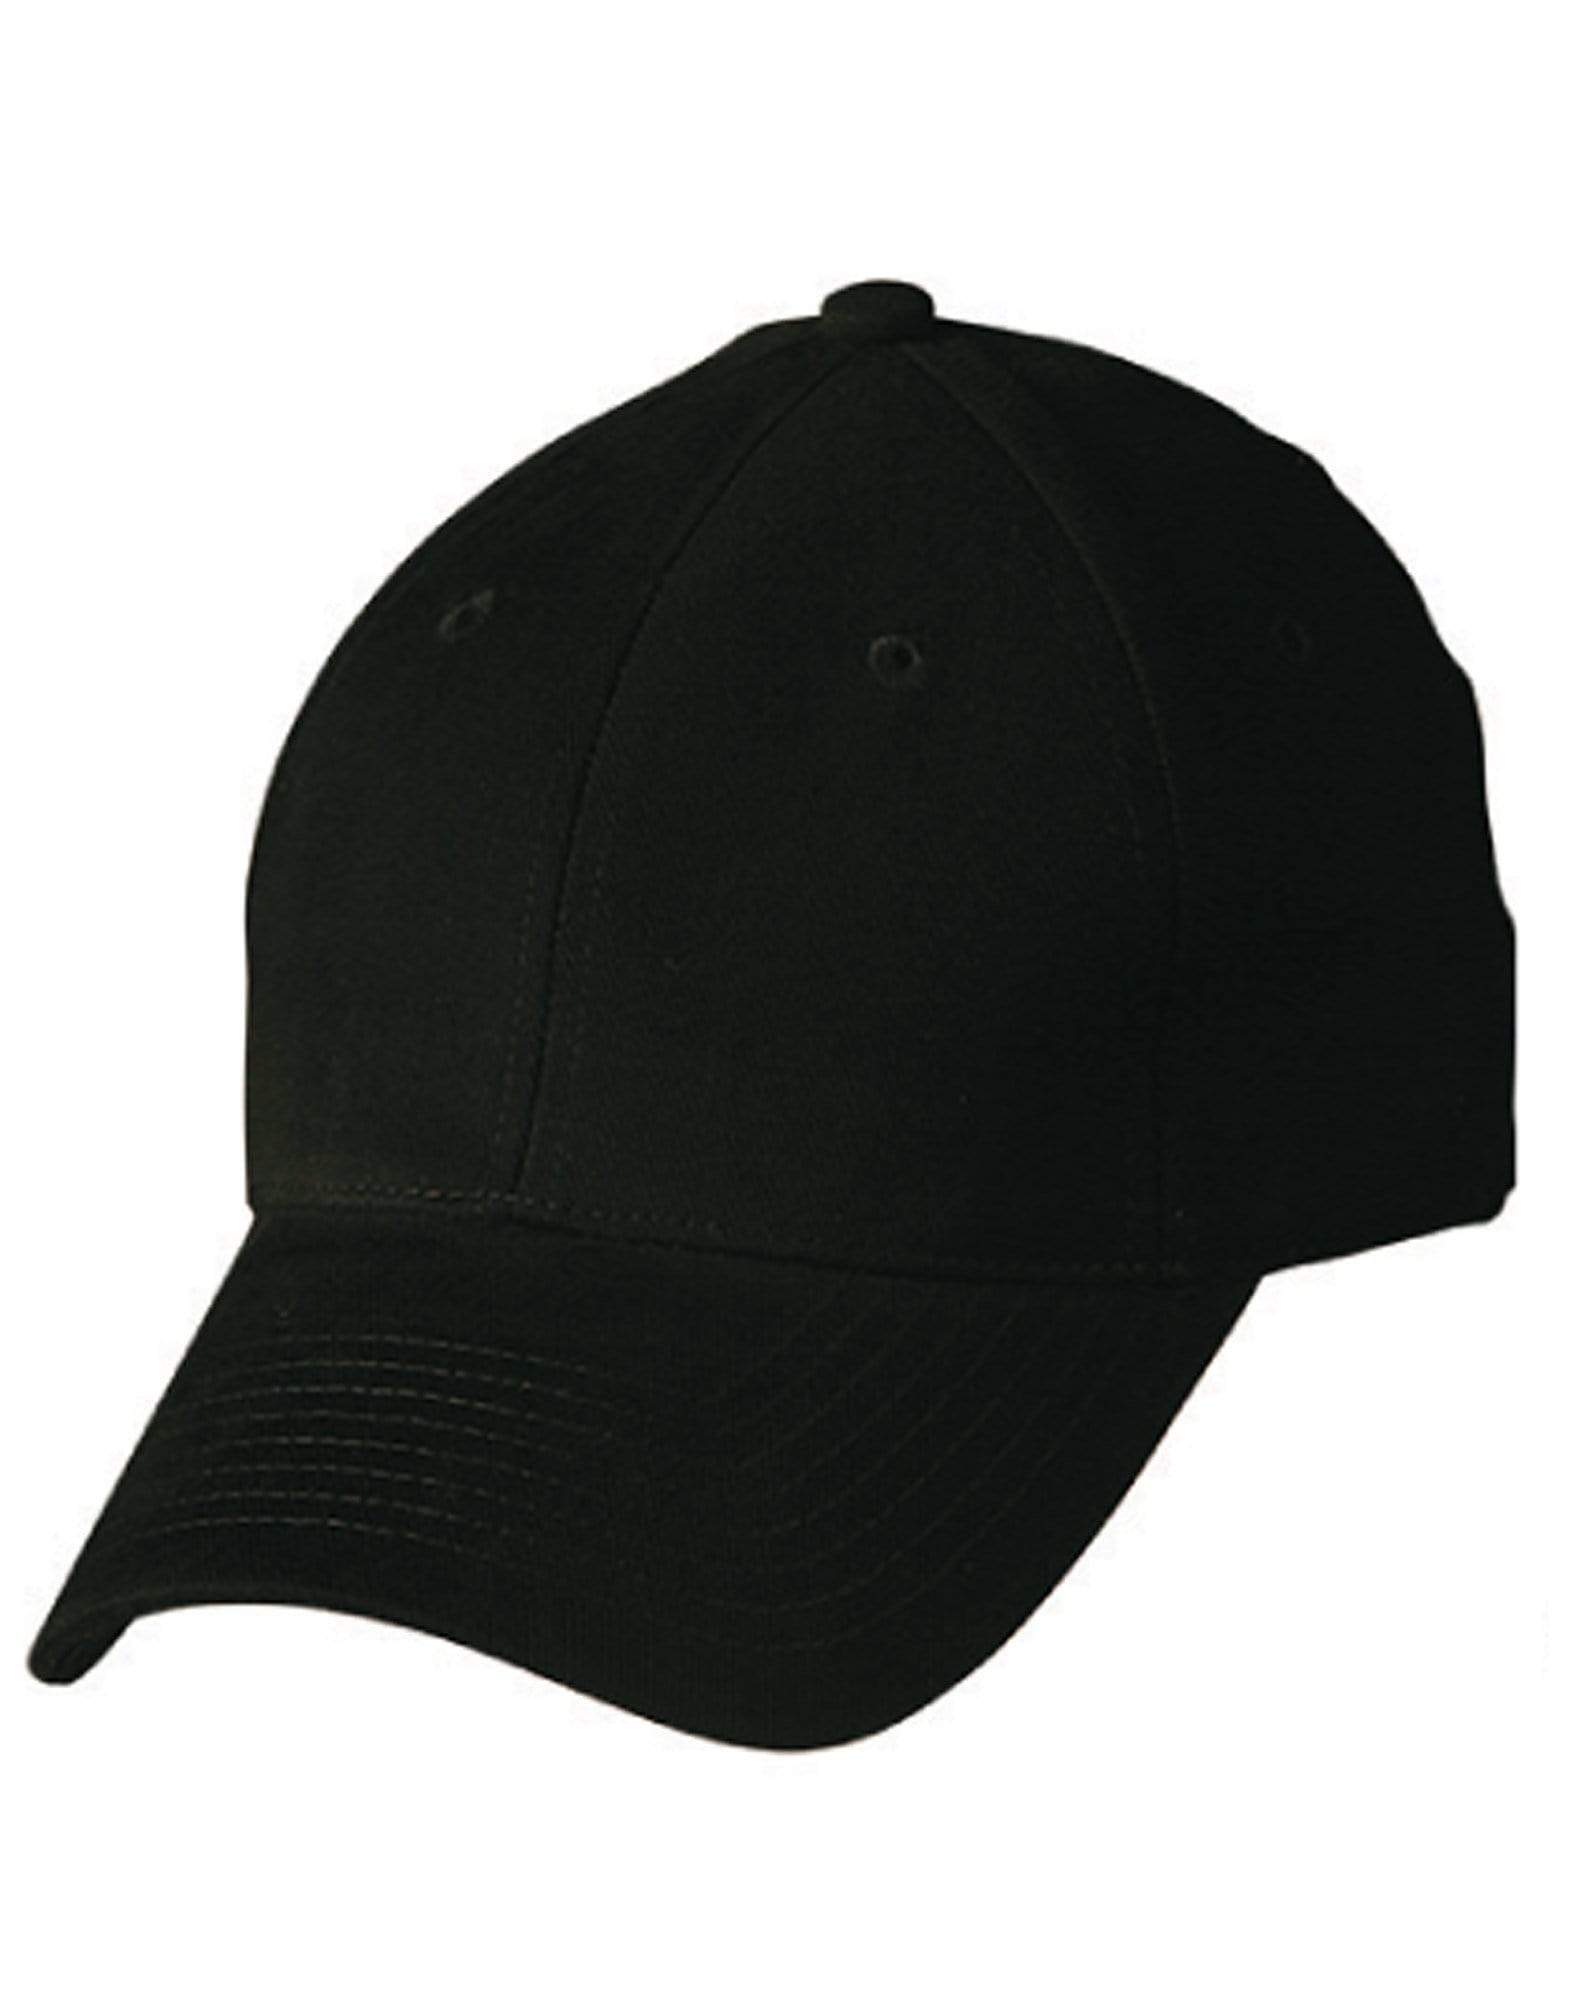 Heavy Brushed Cotton Cap With Buckle Ch35 Active Wear Winning Spirit Black One size 